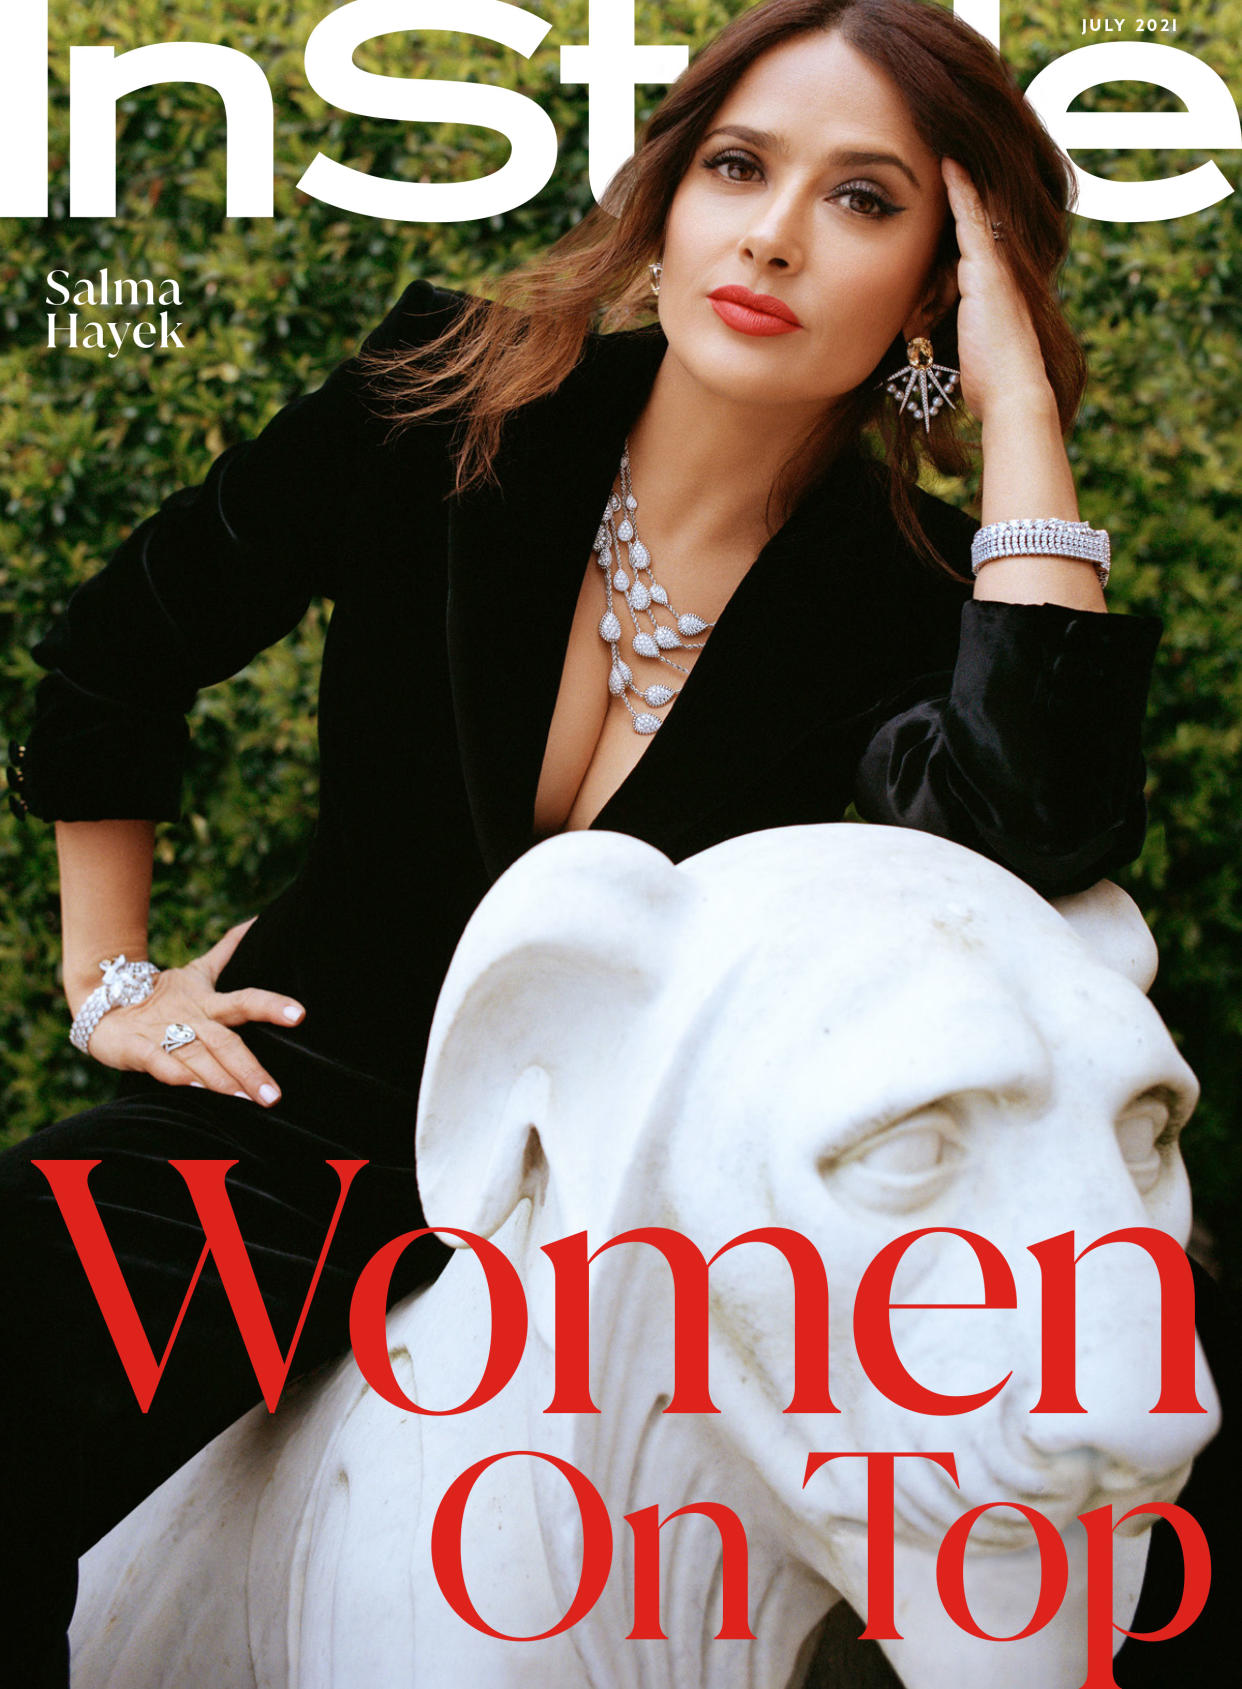 Salma Hayek appears on the latest cover of InStyle (on stands July 11) to discuss aging in Hollywood. (Photo: InStyle)